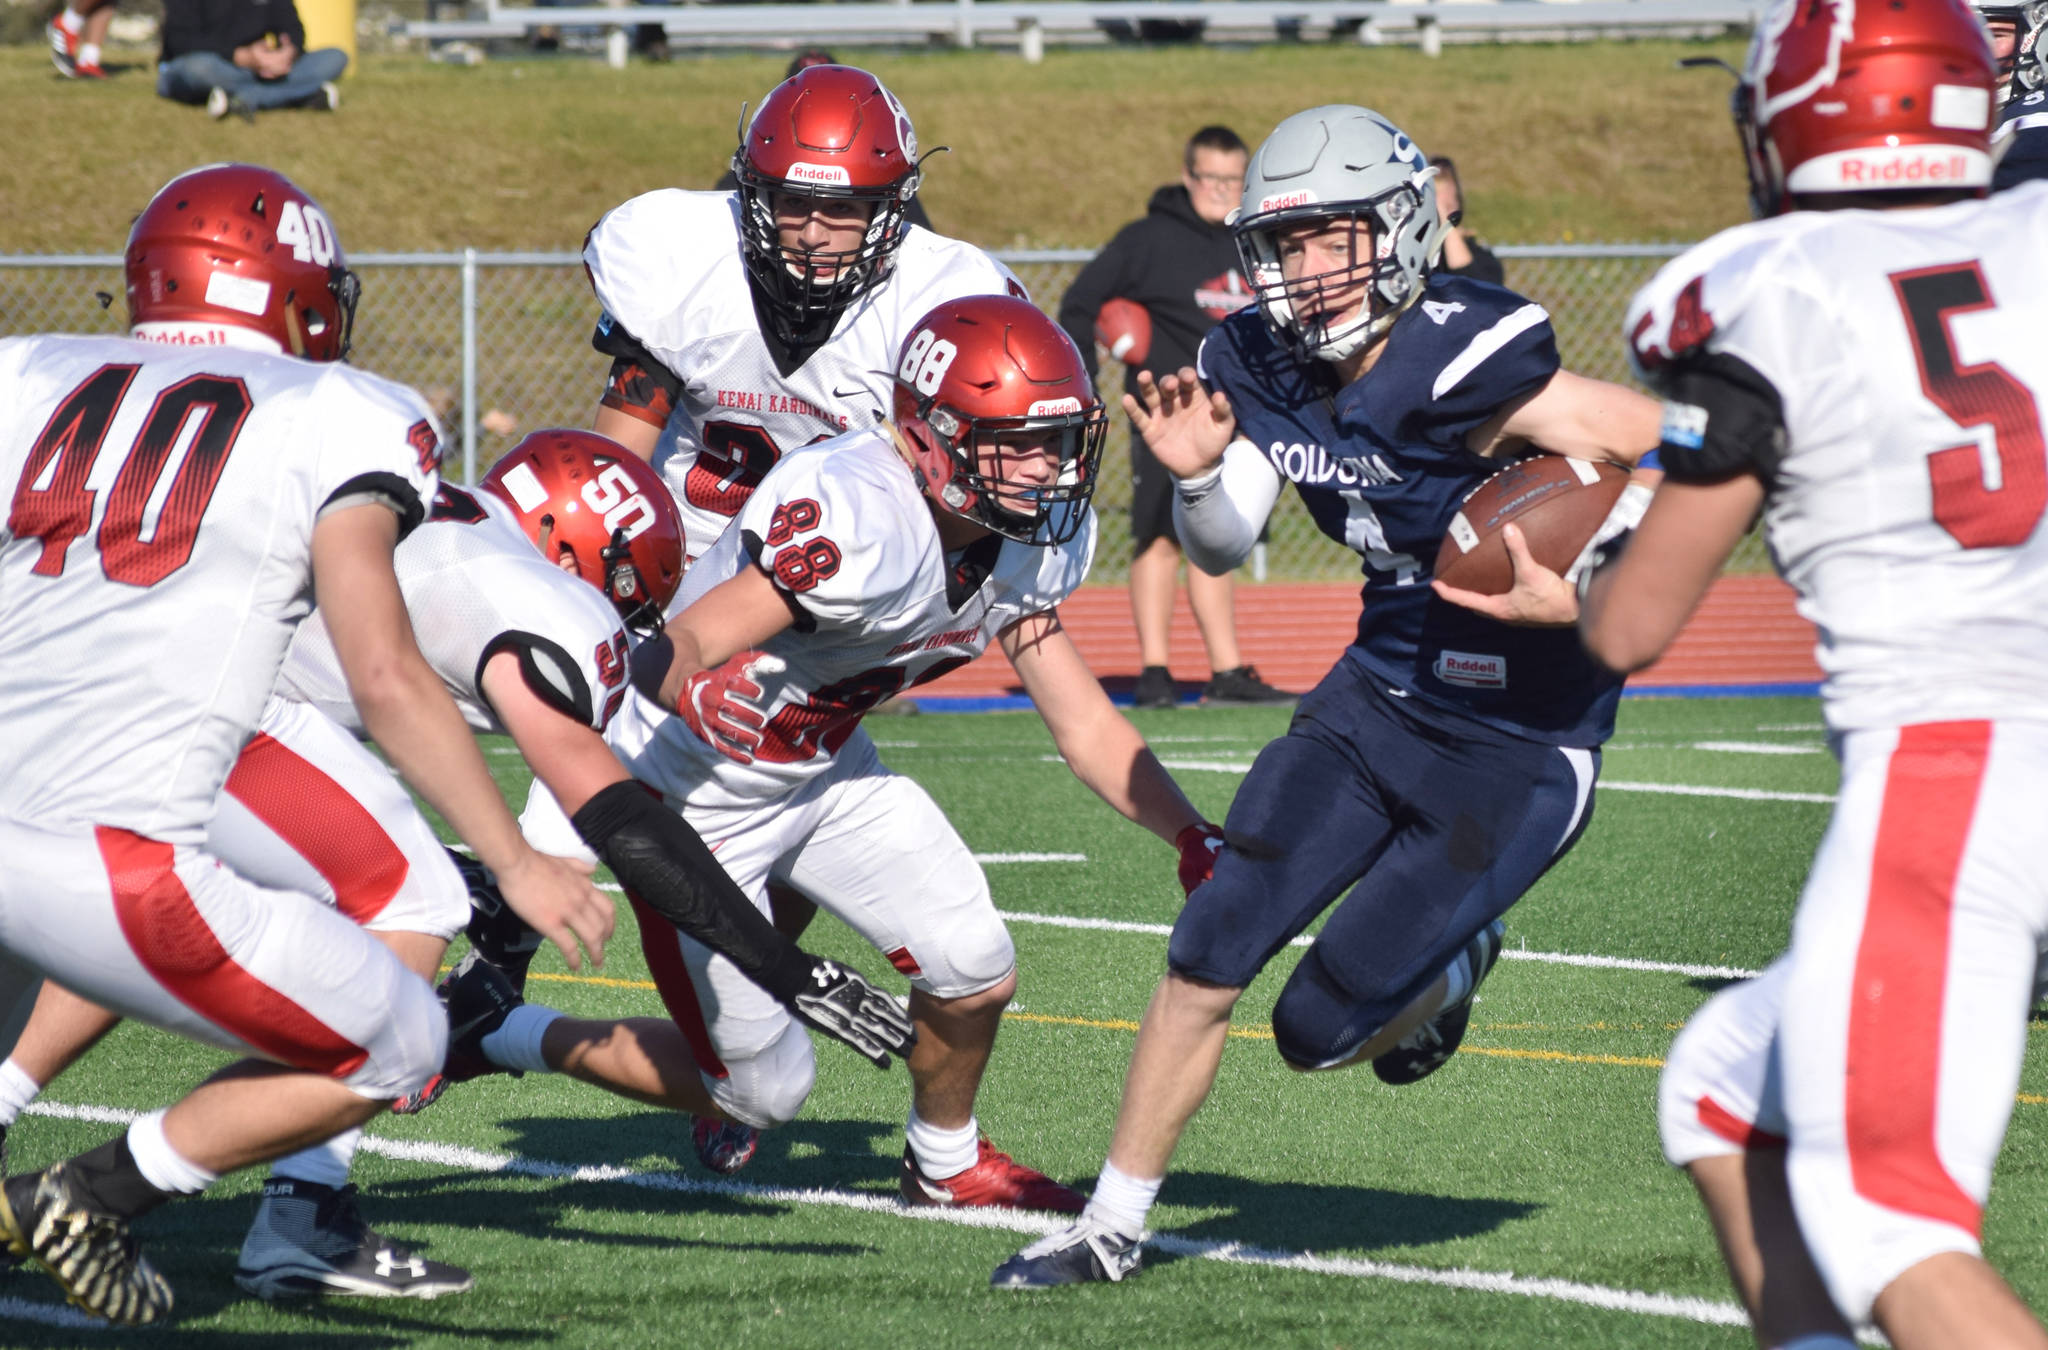 Soldotna quarterback Jersey Truesdell tries to elude Kenai Central defenders Justin Anderson, Billy Morrow, Tucker Vann, Braedon PItsch and Jacob Howard on Saturday at Justin Maile Field in Soldotna. (Photo by Jeff Helminiak/Peninsula Clarion)